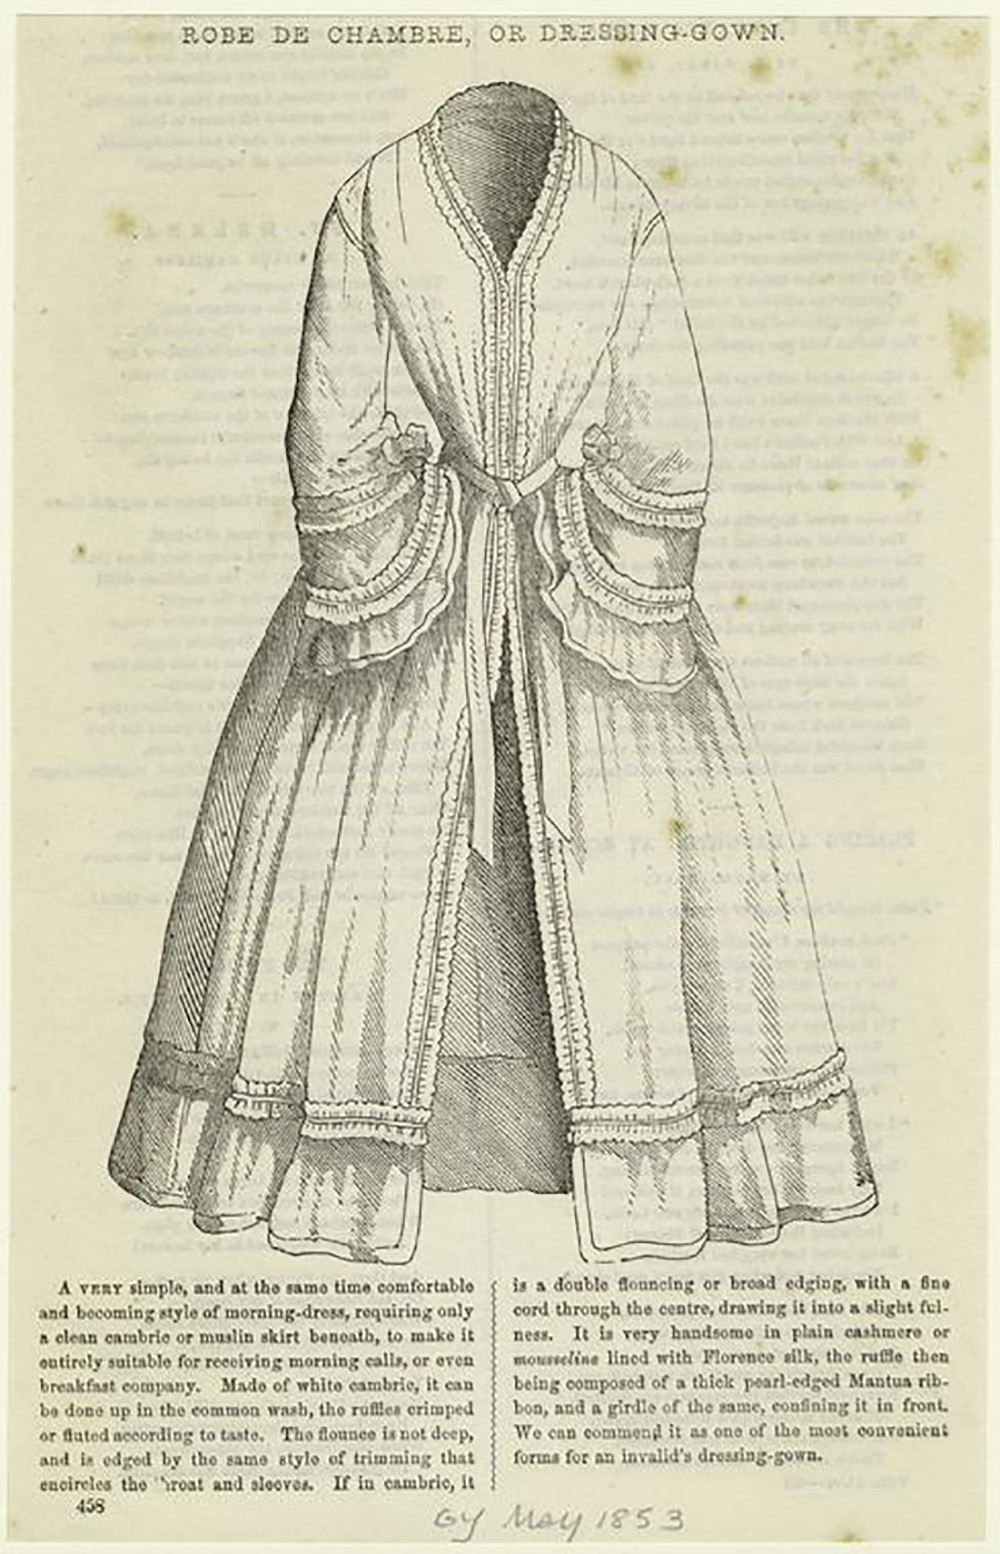 1853 dressing gown